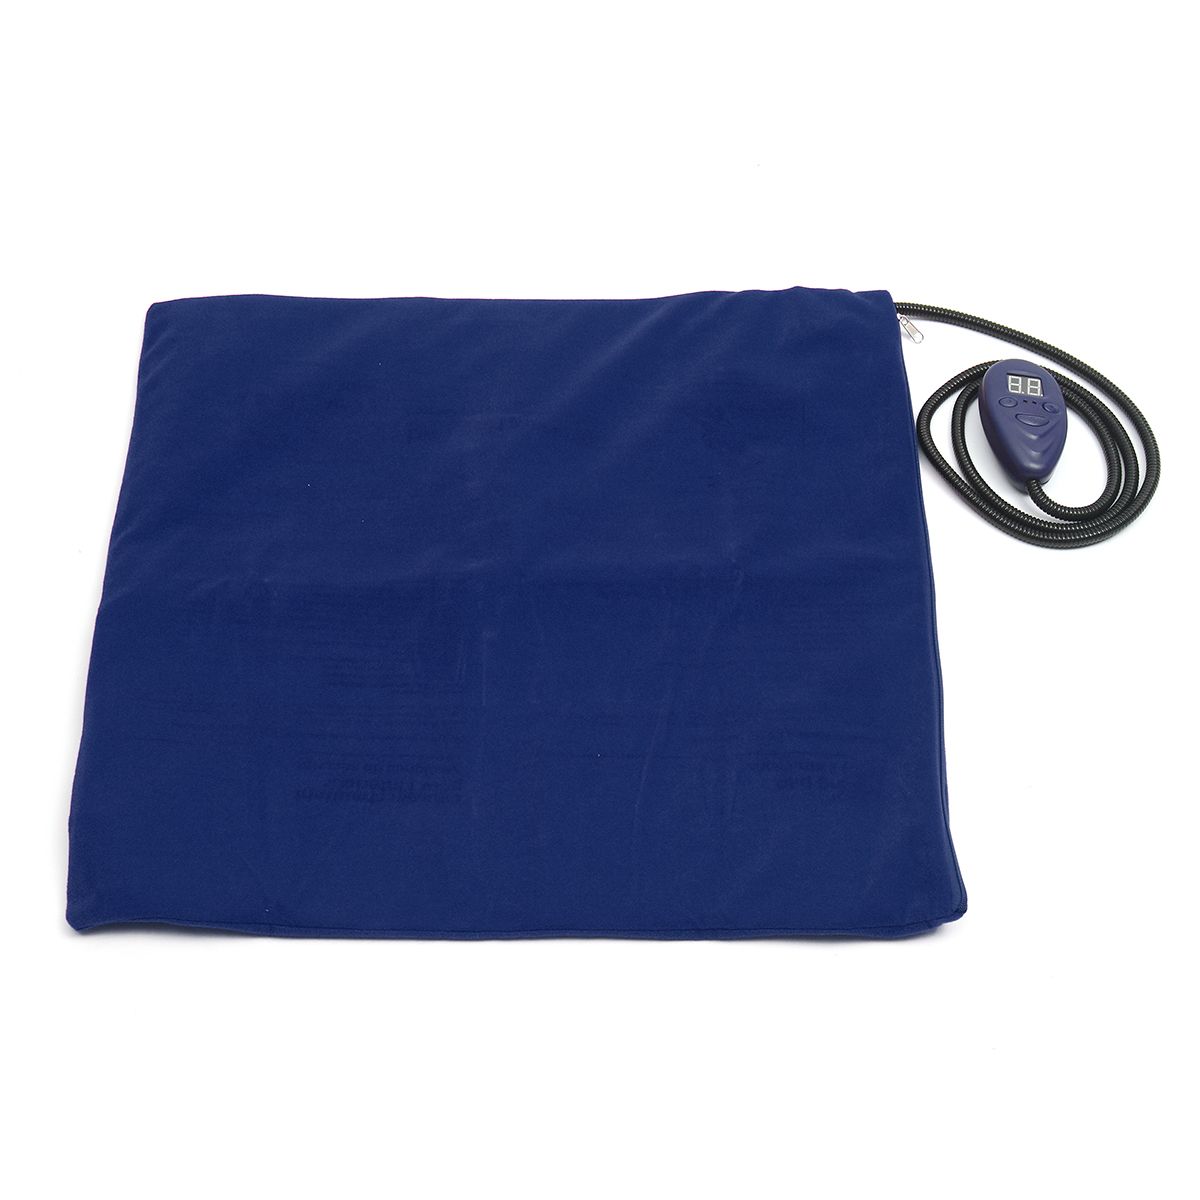 30x40cm-Electric-Heating-Heater-Heated-Bed-Mat-Pad-Blanket-For-Pet-Dog-Cat-Rabbit-1317917